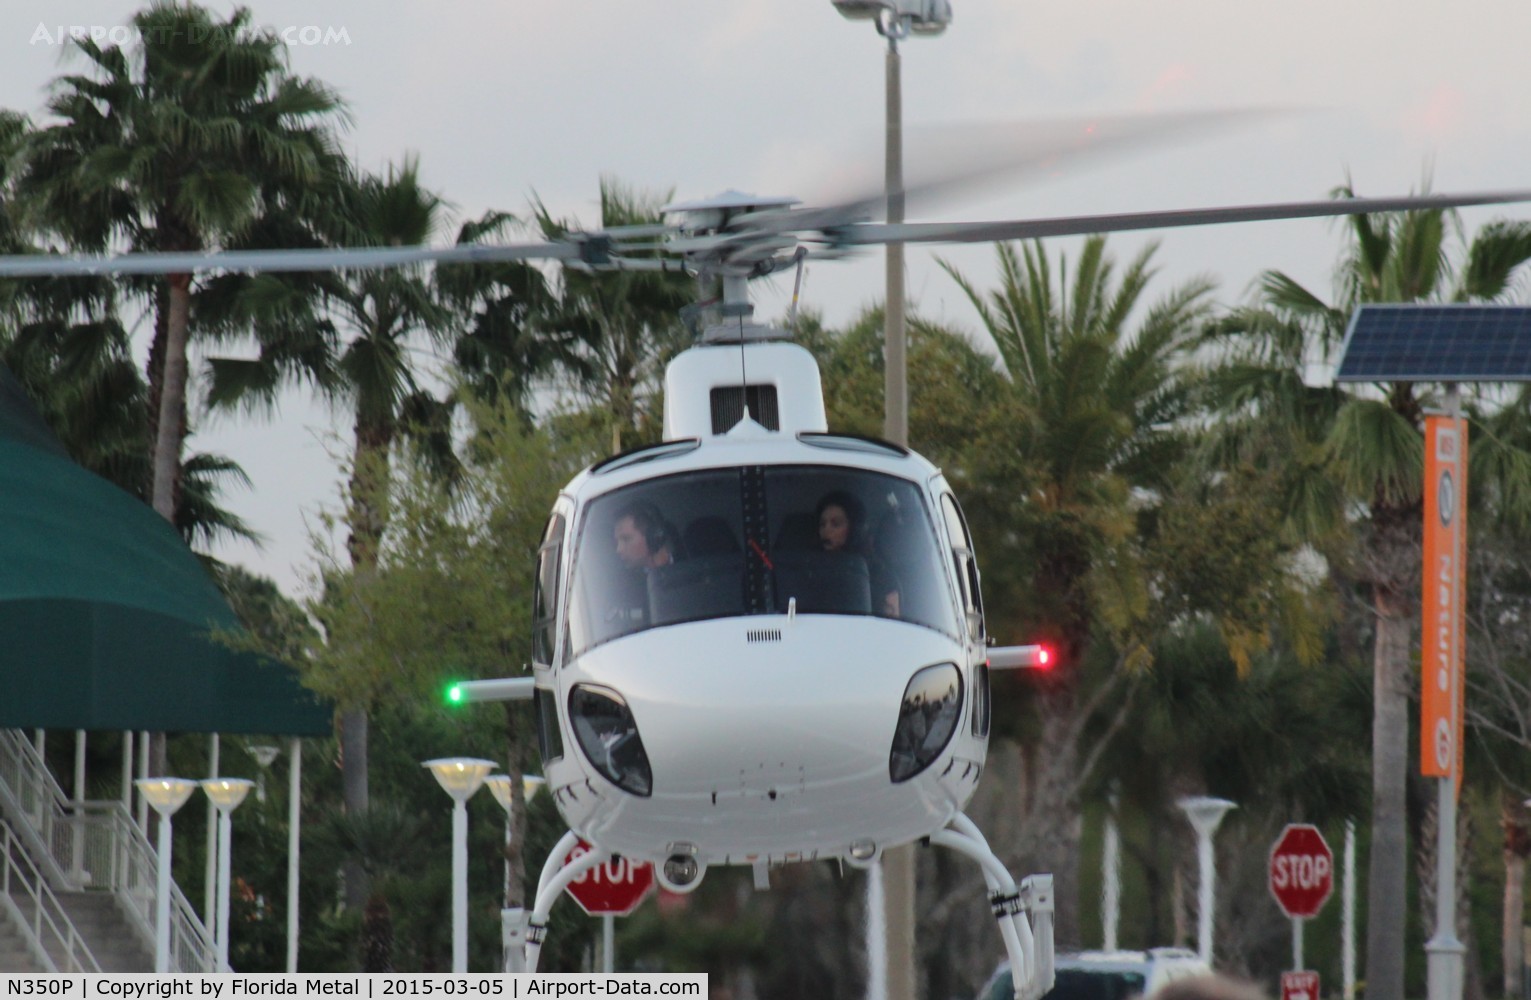 N350P, 2014 Airbus Helicopters AS-350B-3 Ecureuil C/N 7853, AS-350B at Heliexpo Orlando 2015